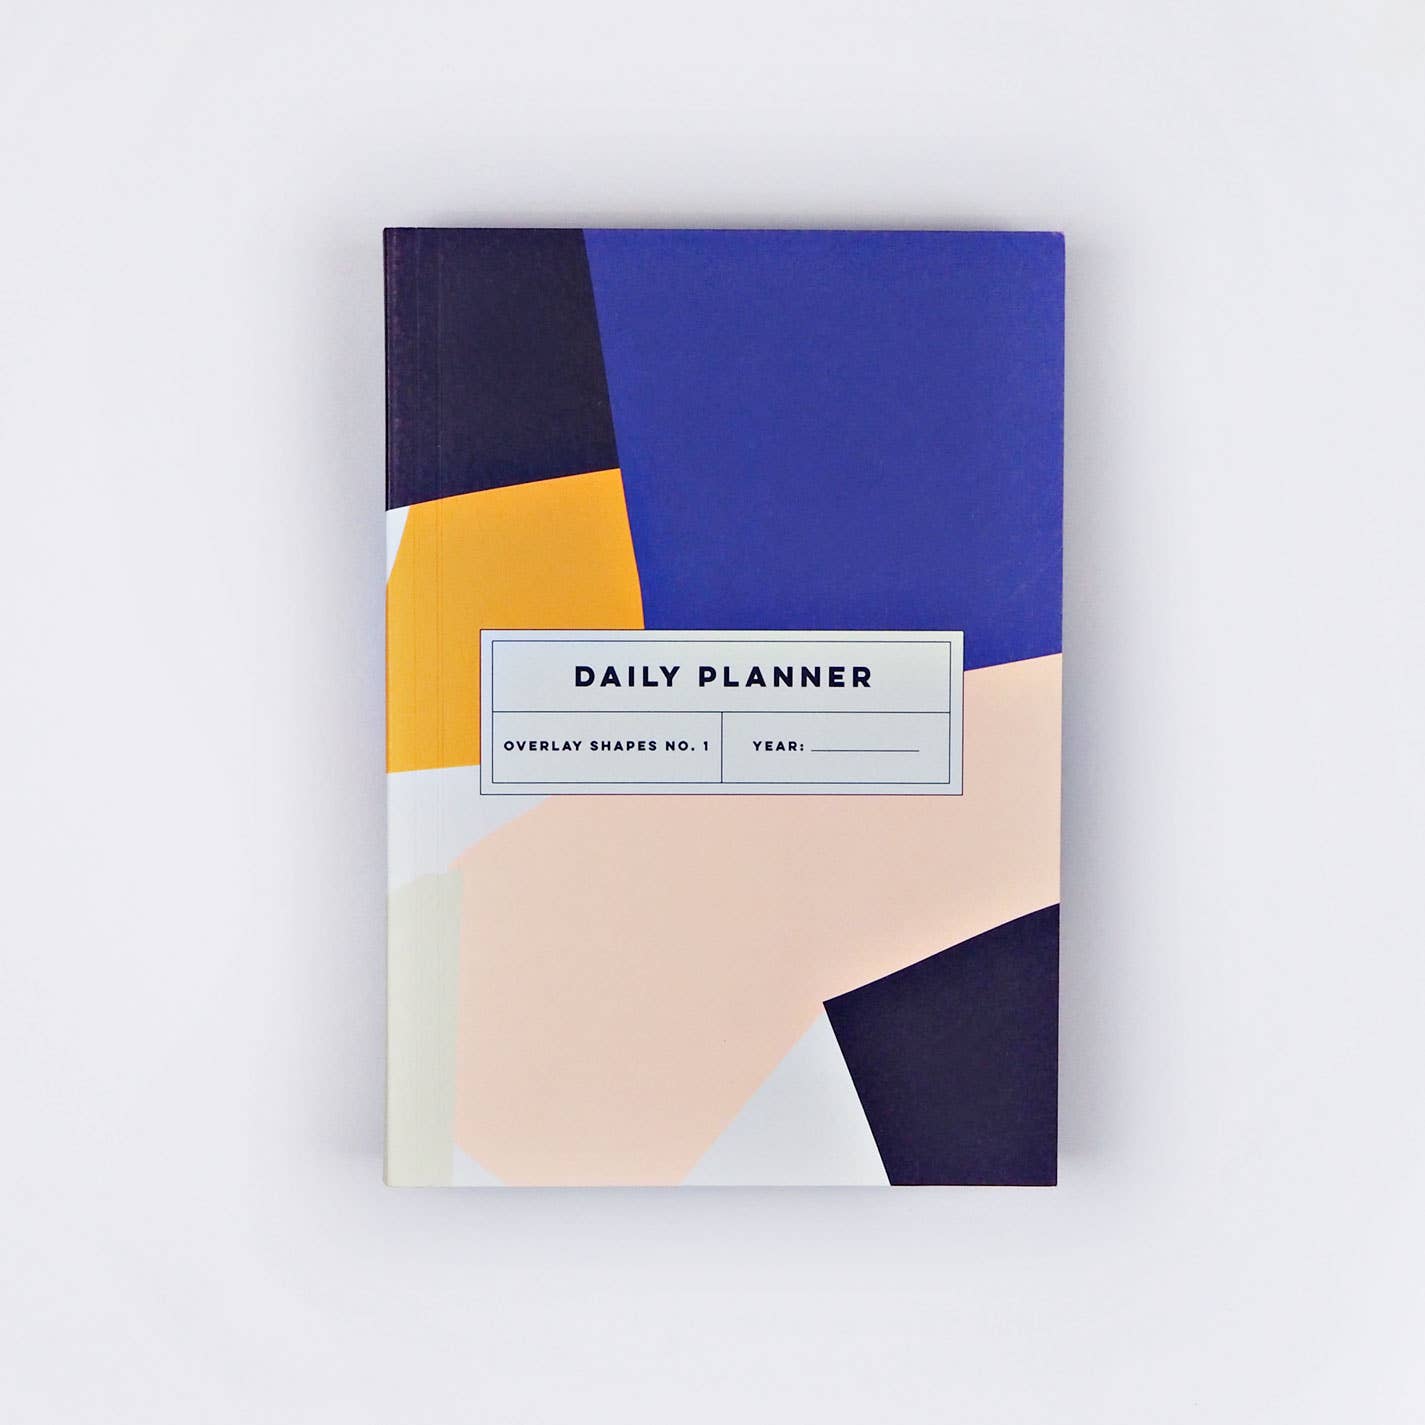 Overlay Shapes No. 1 Daily Planner Book